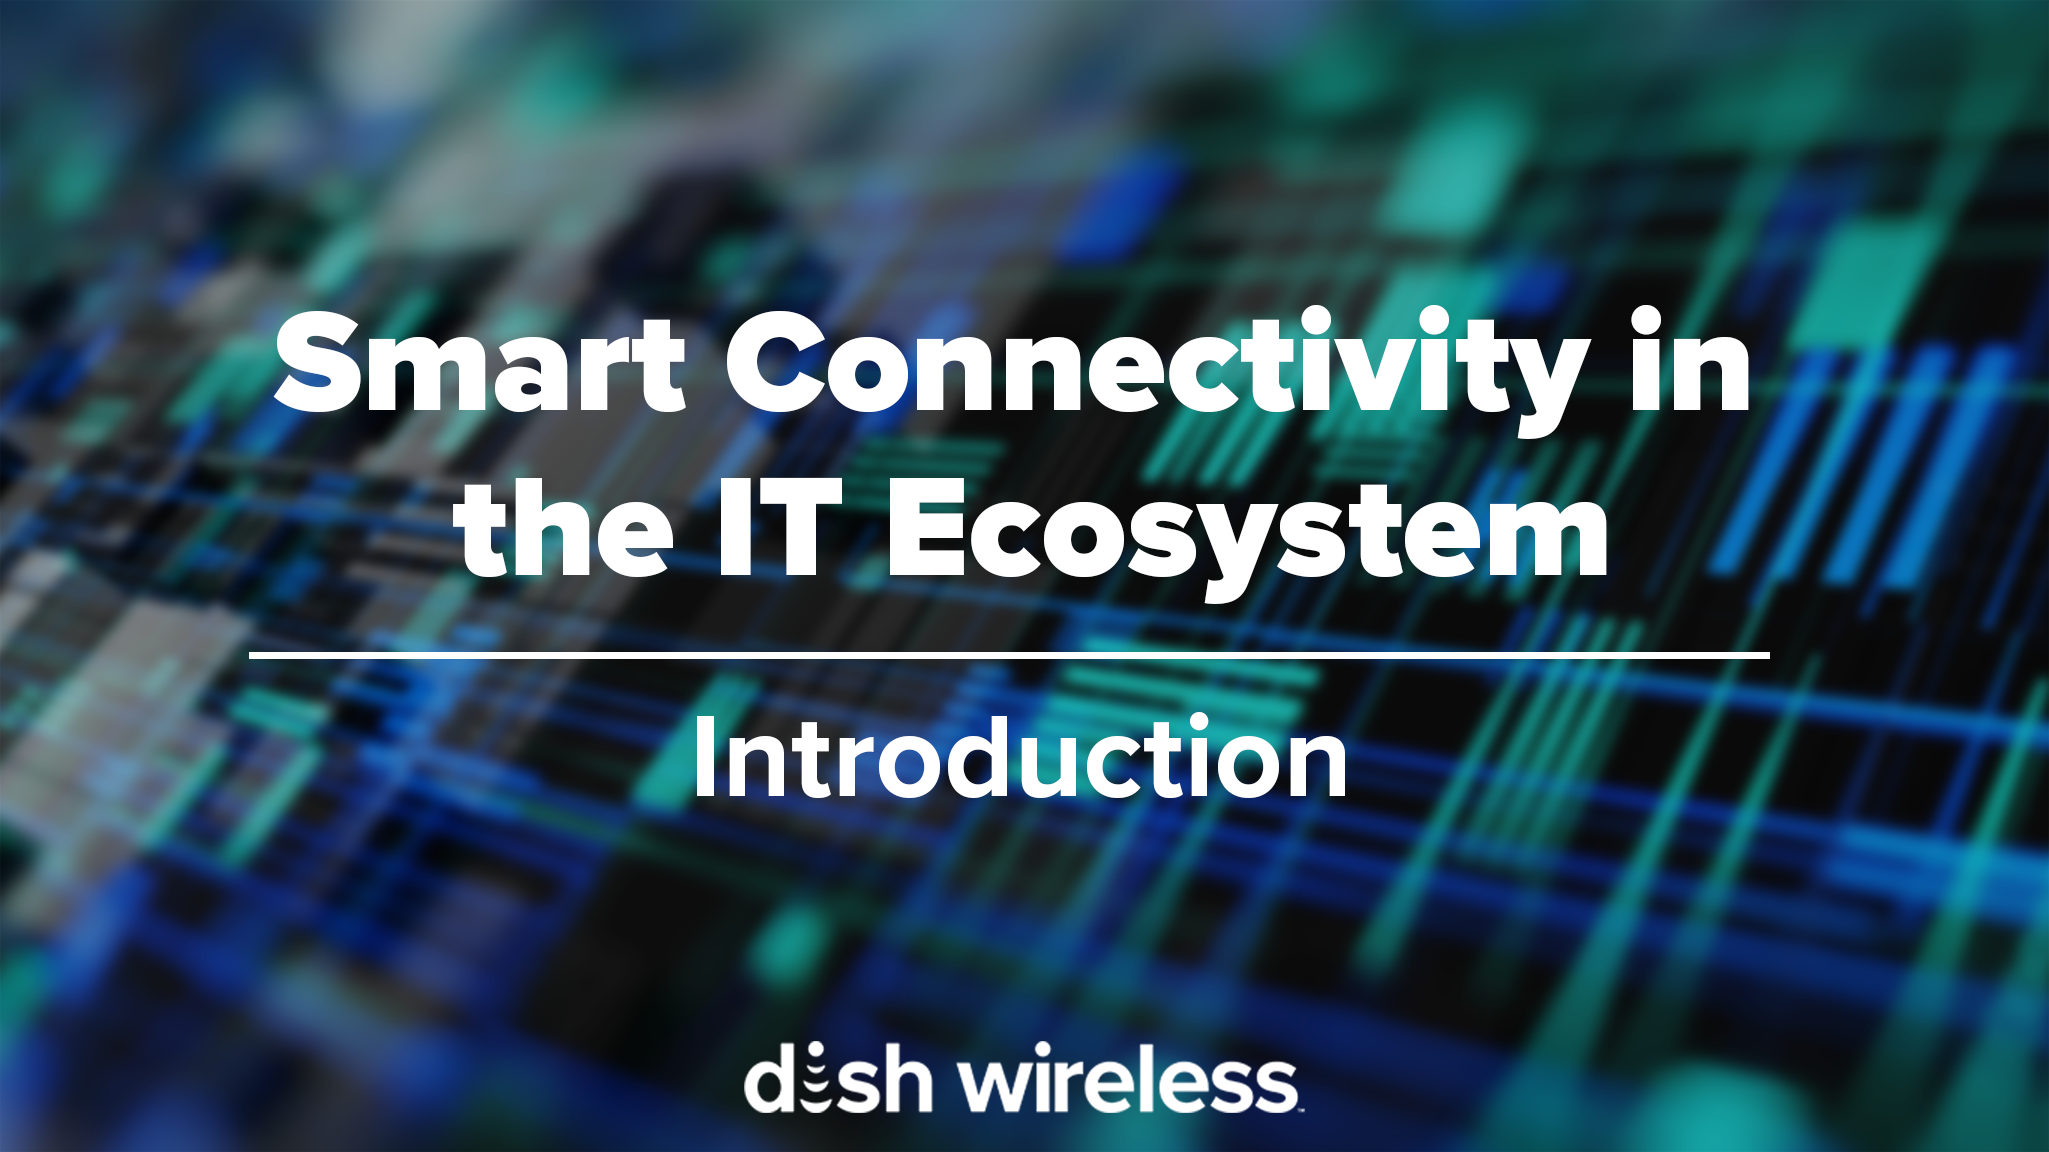 smart connectivity in the IT Ecosystem web banner tile